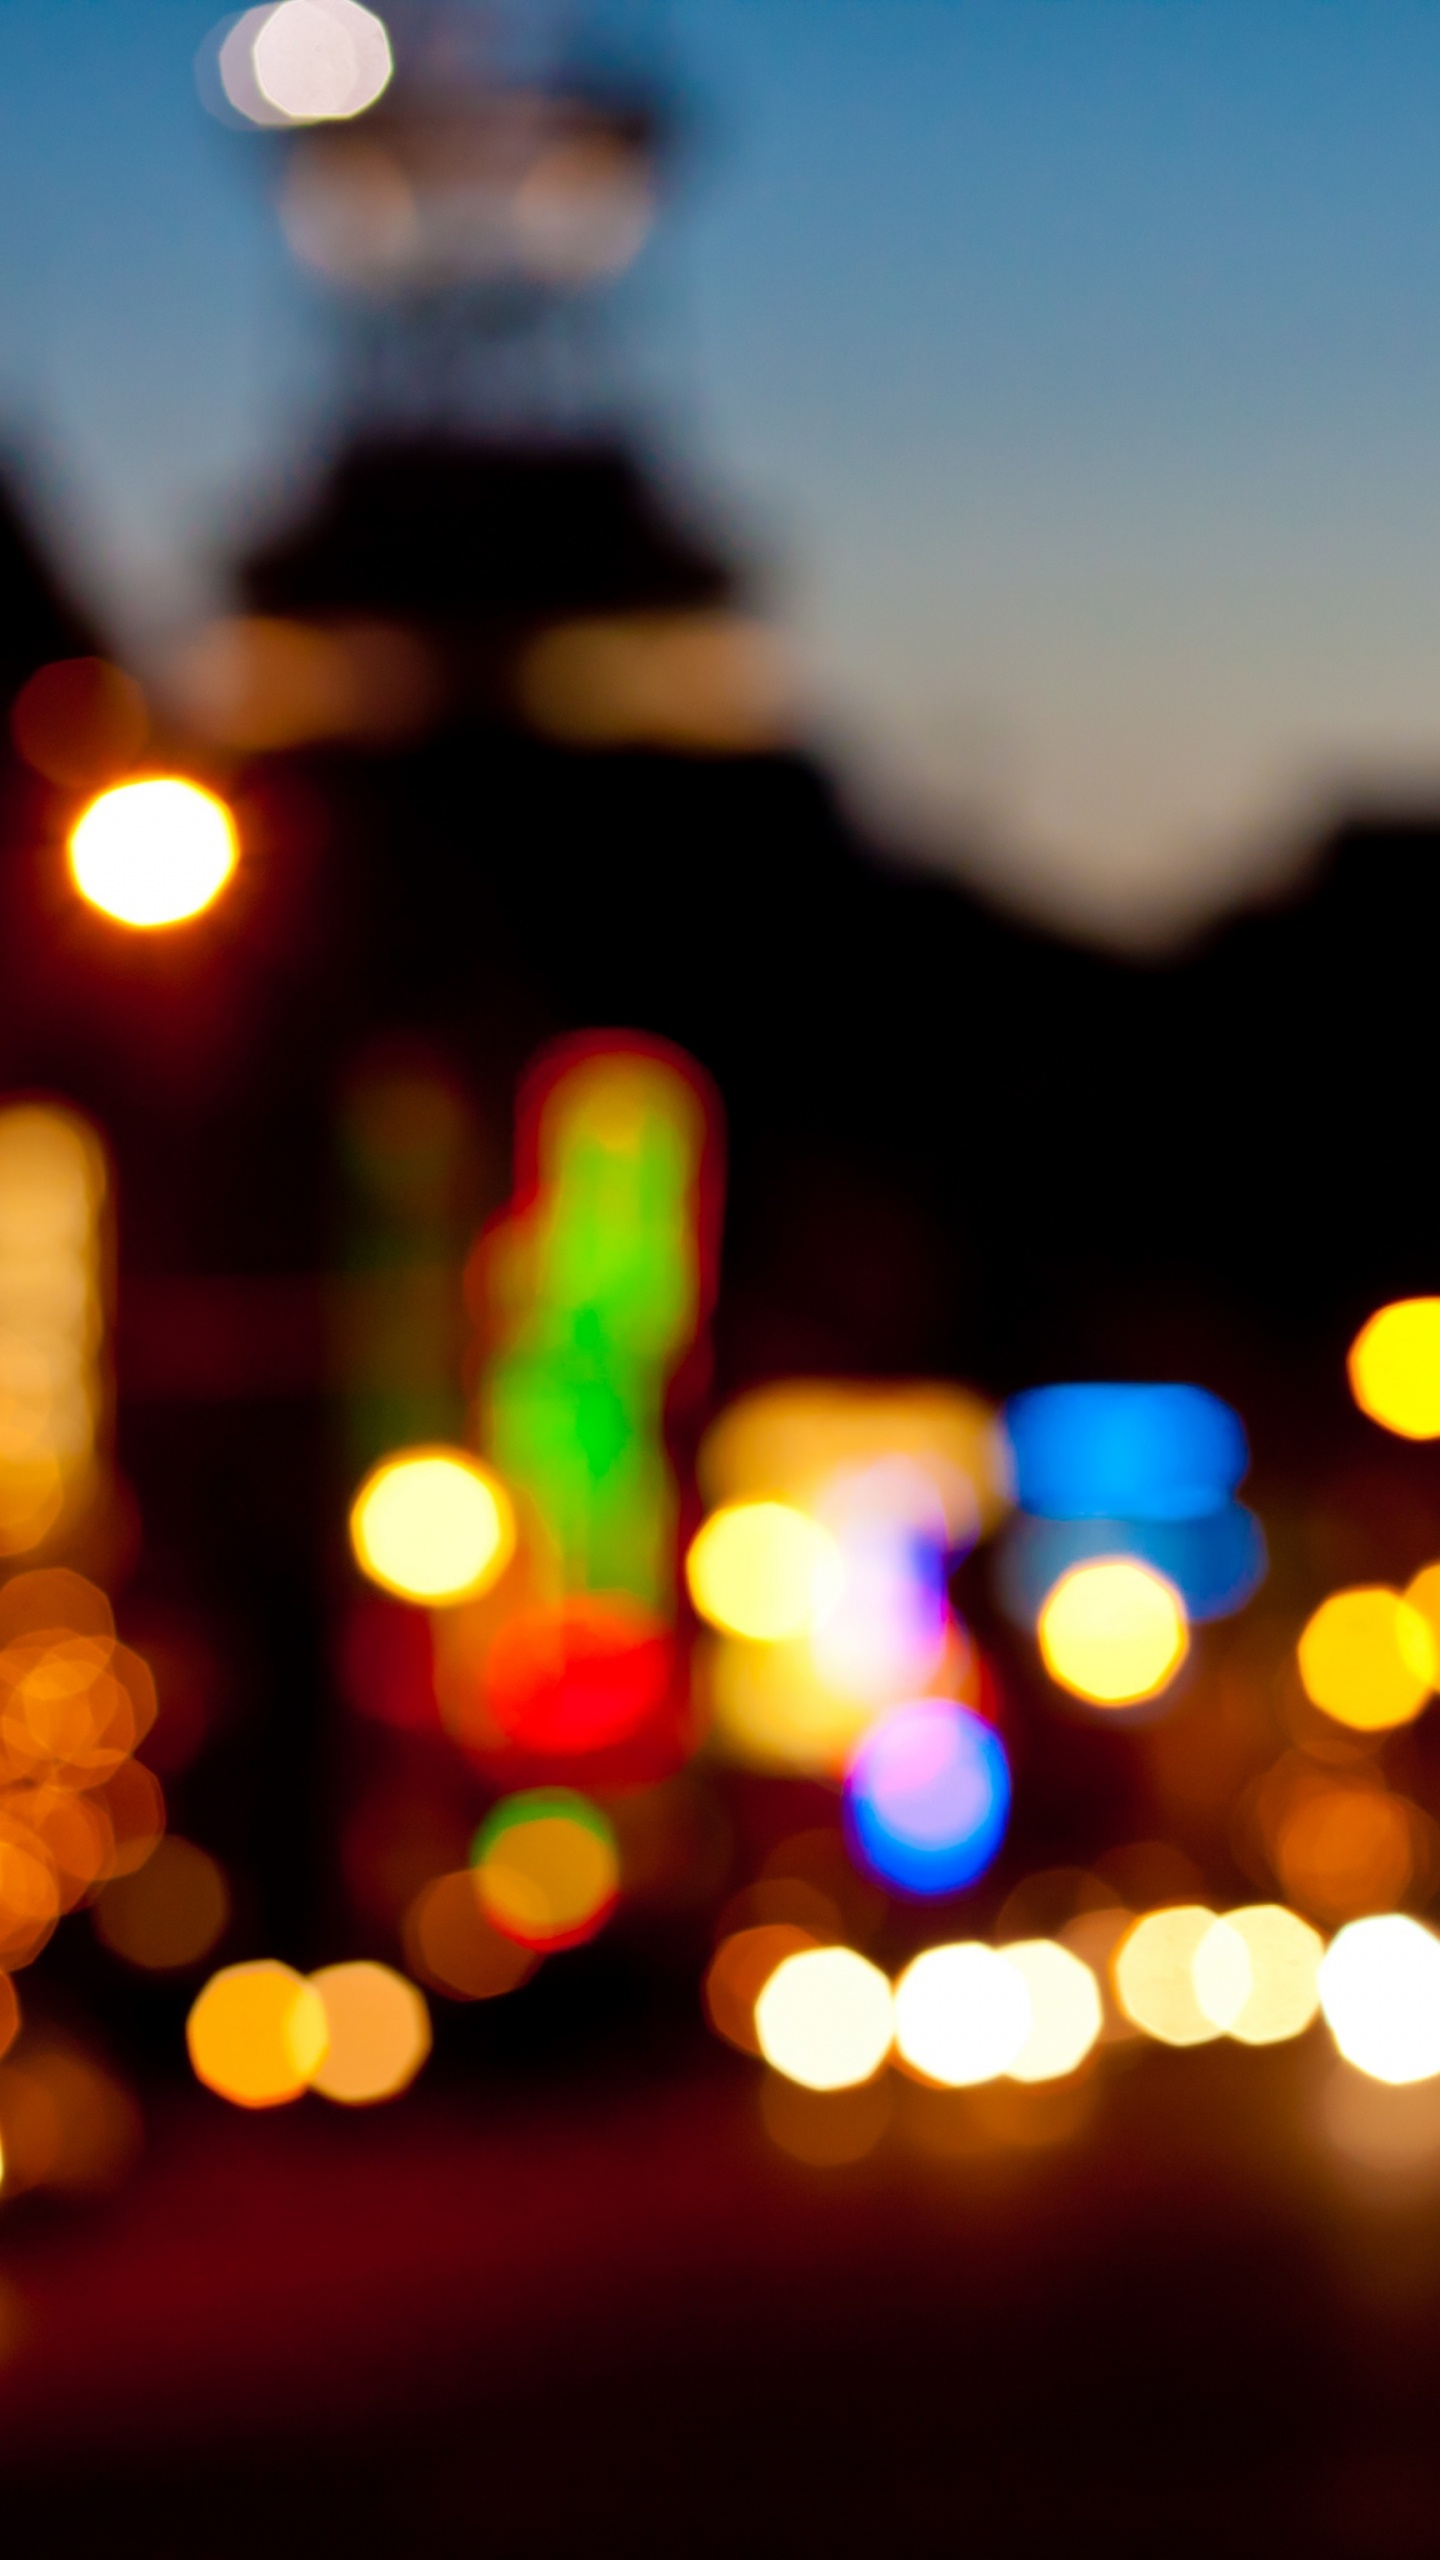 Bokeh Photography of City Lights During Night Time. Wallpaper in 1440x2560 Resolution